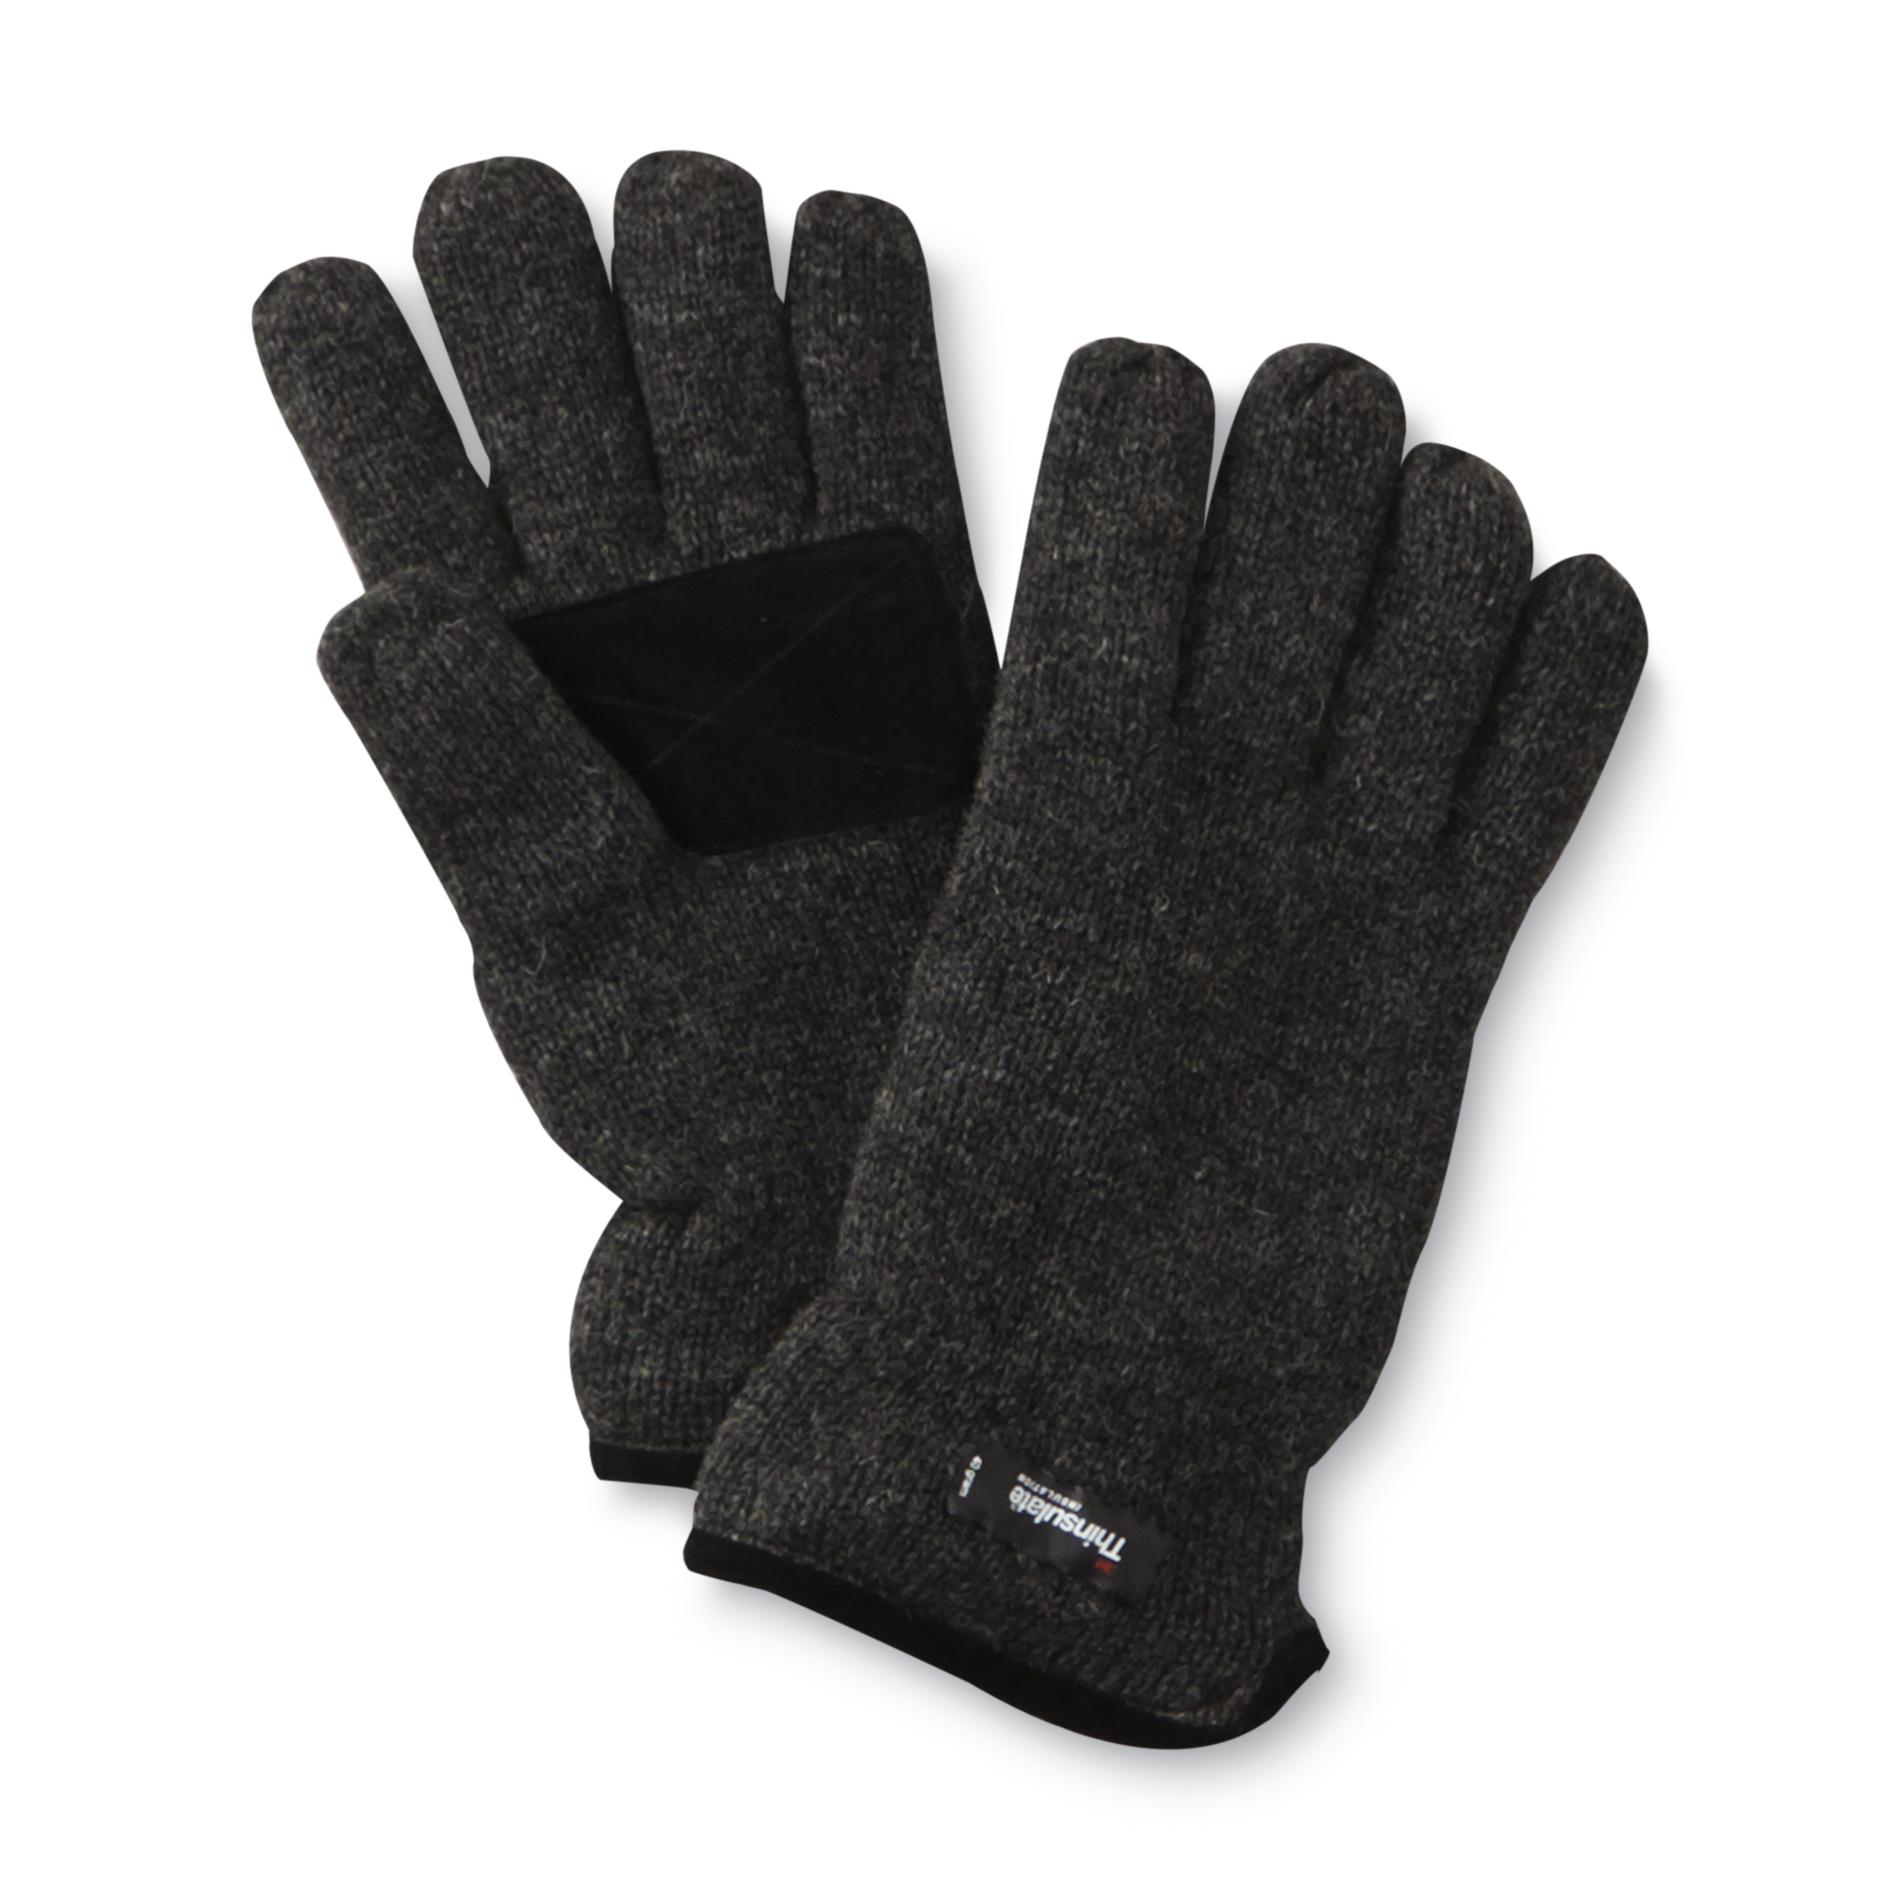 Attention Men's Insulated Wool-Blend Winter Gloves